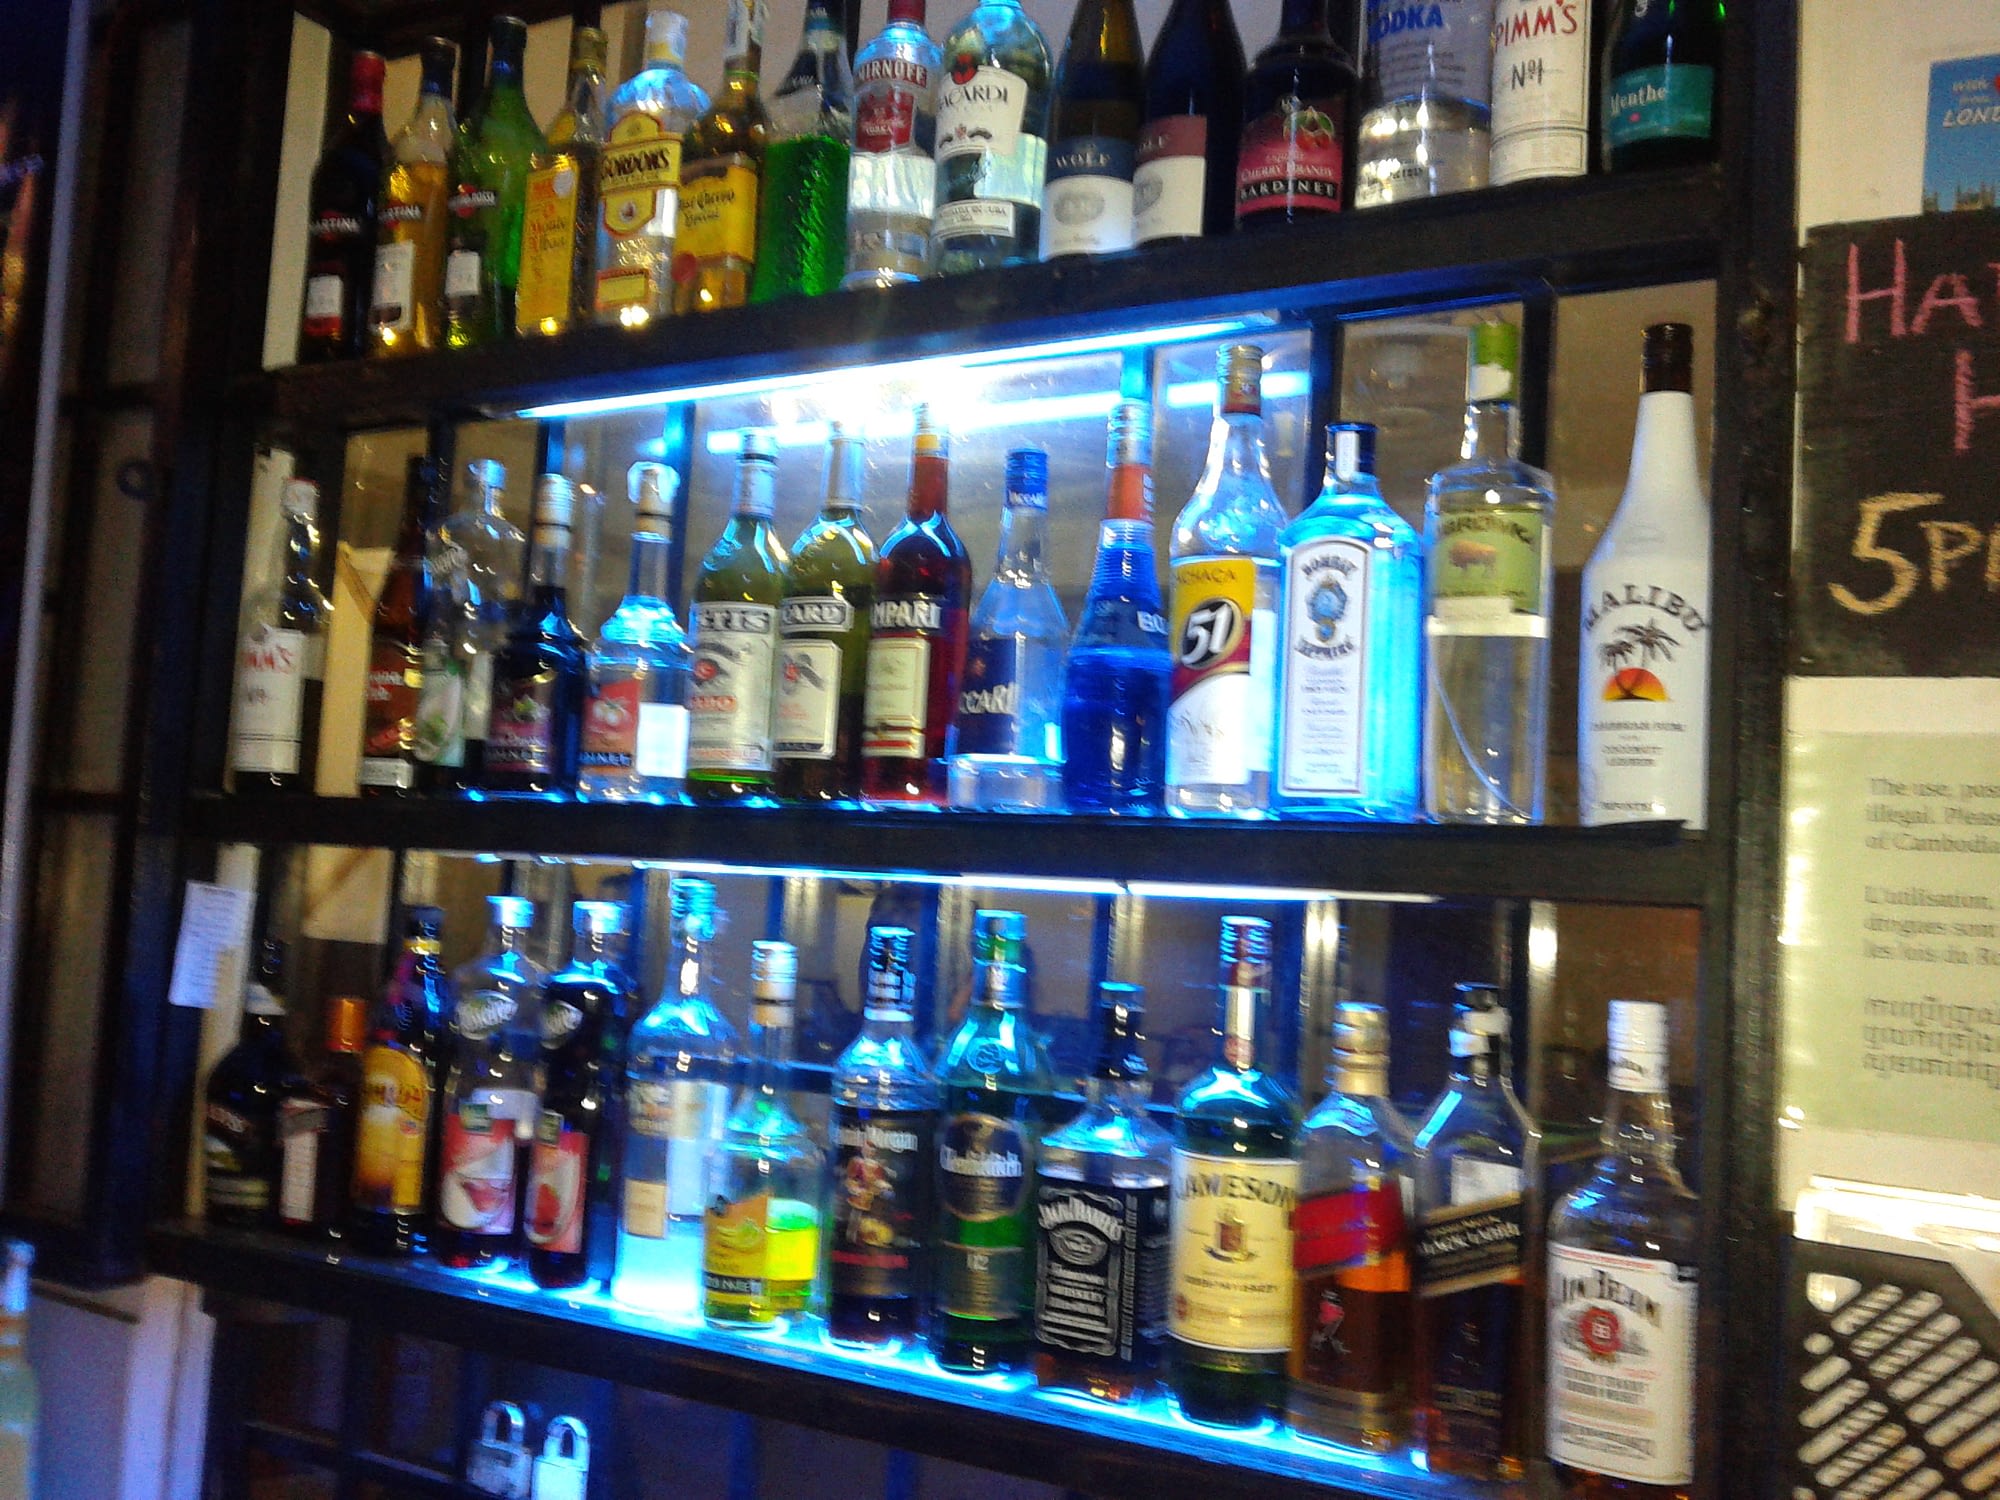 Bottles of alcohol on the shelves of Equinox.